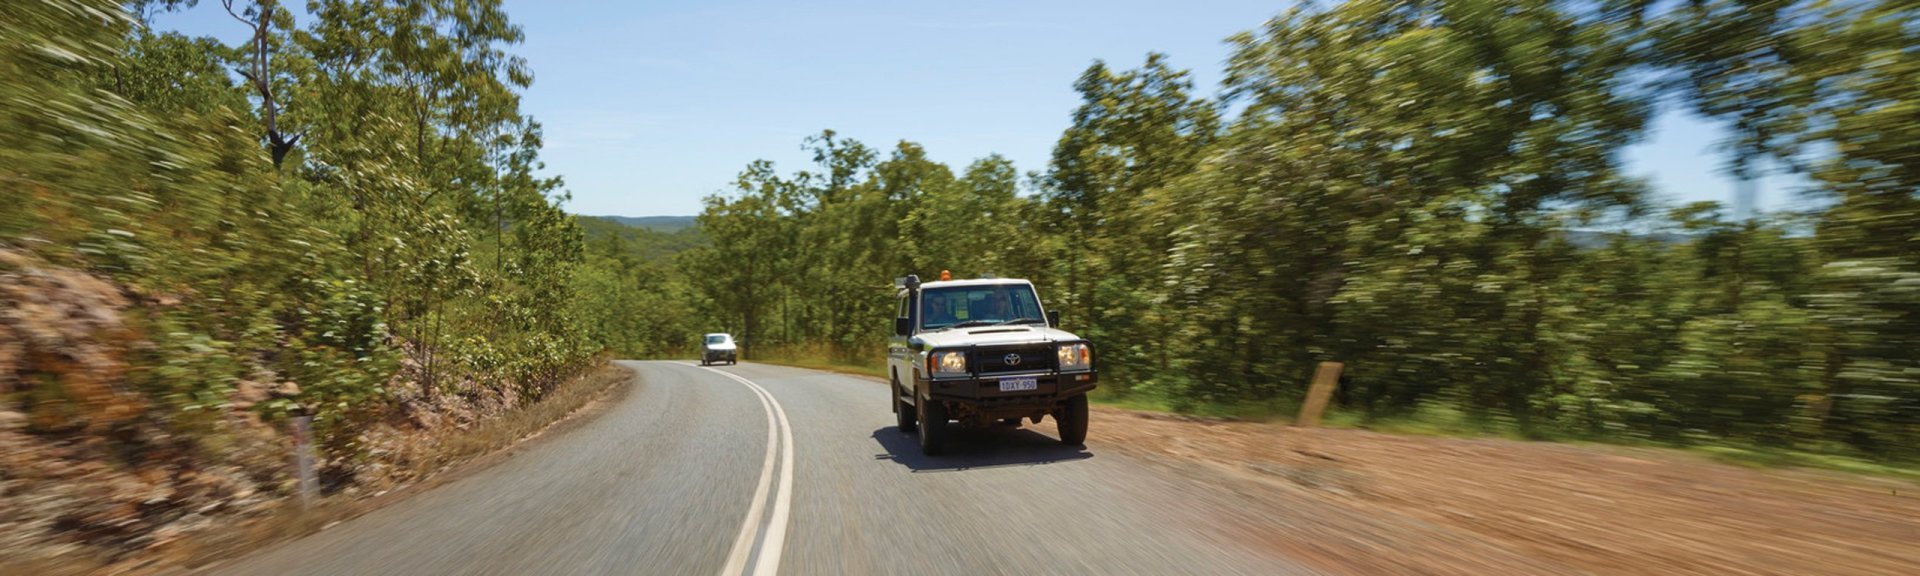 Driving in Kakadu. Photo: Peter Eve, Tourism NT